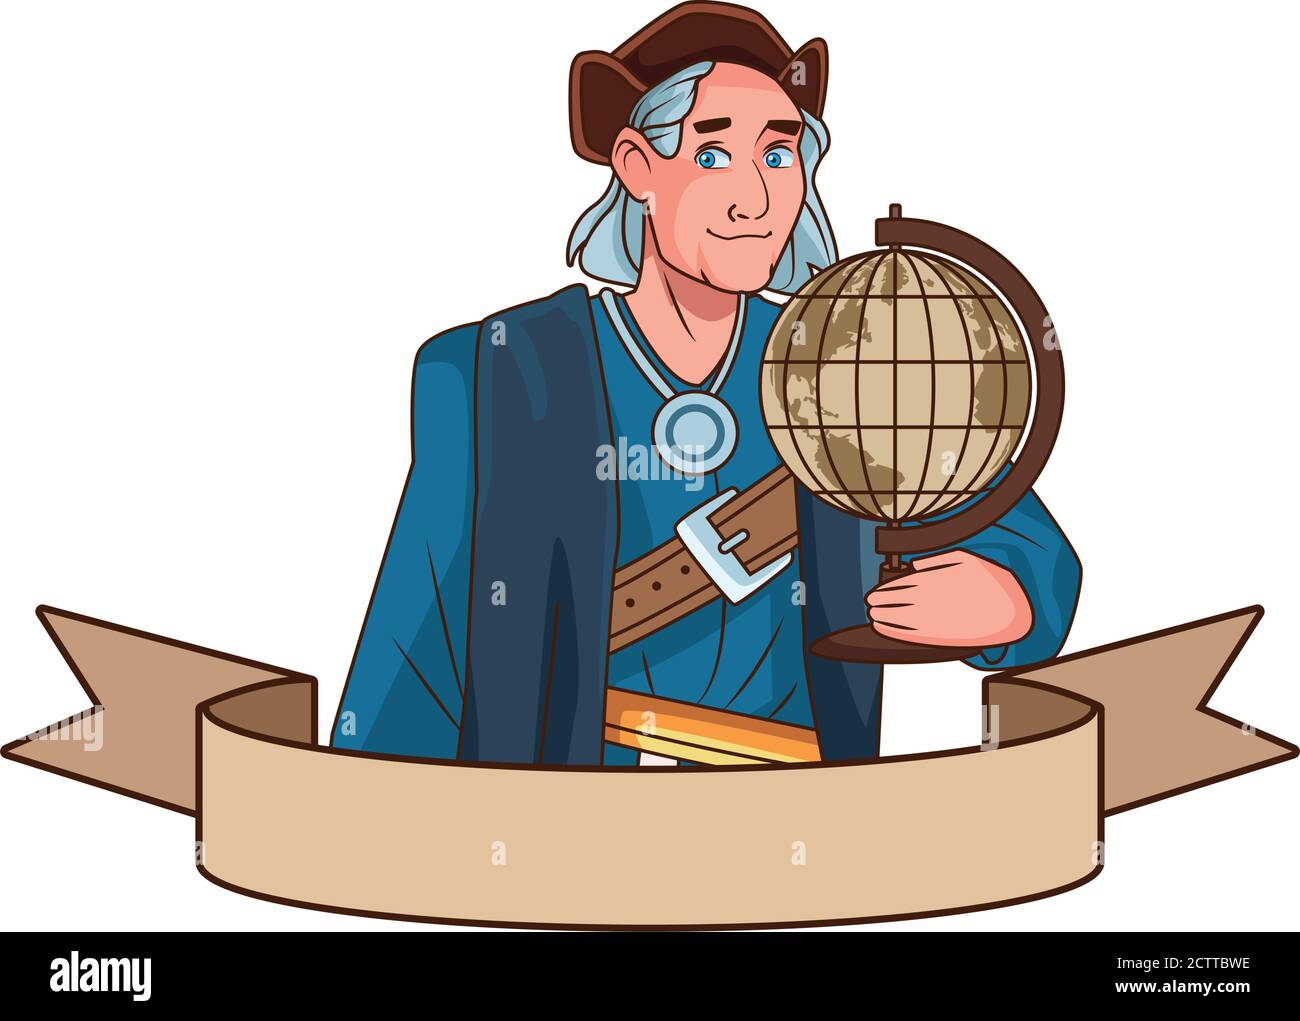 Christopher Columbus with world maps character vector illustration design Stock Vector